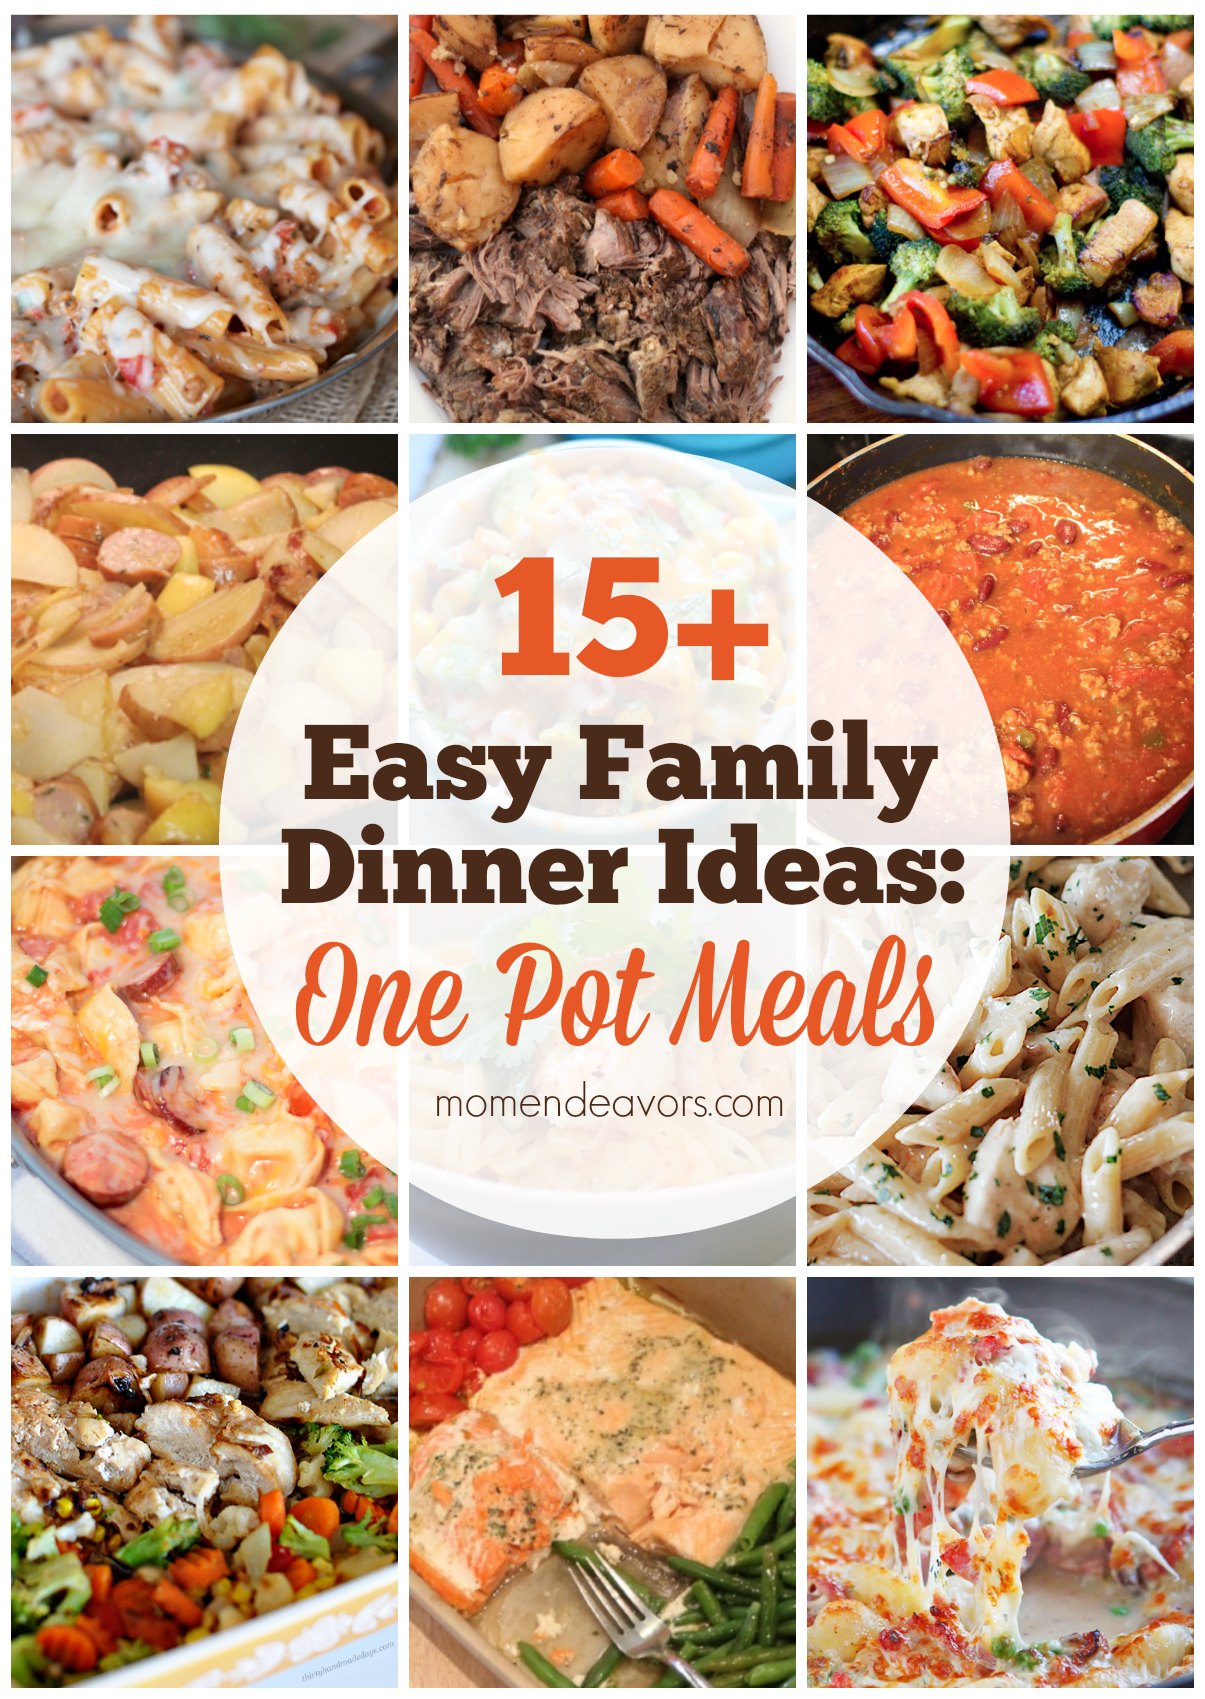 4 easy family dinners to serve your family this week!